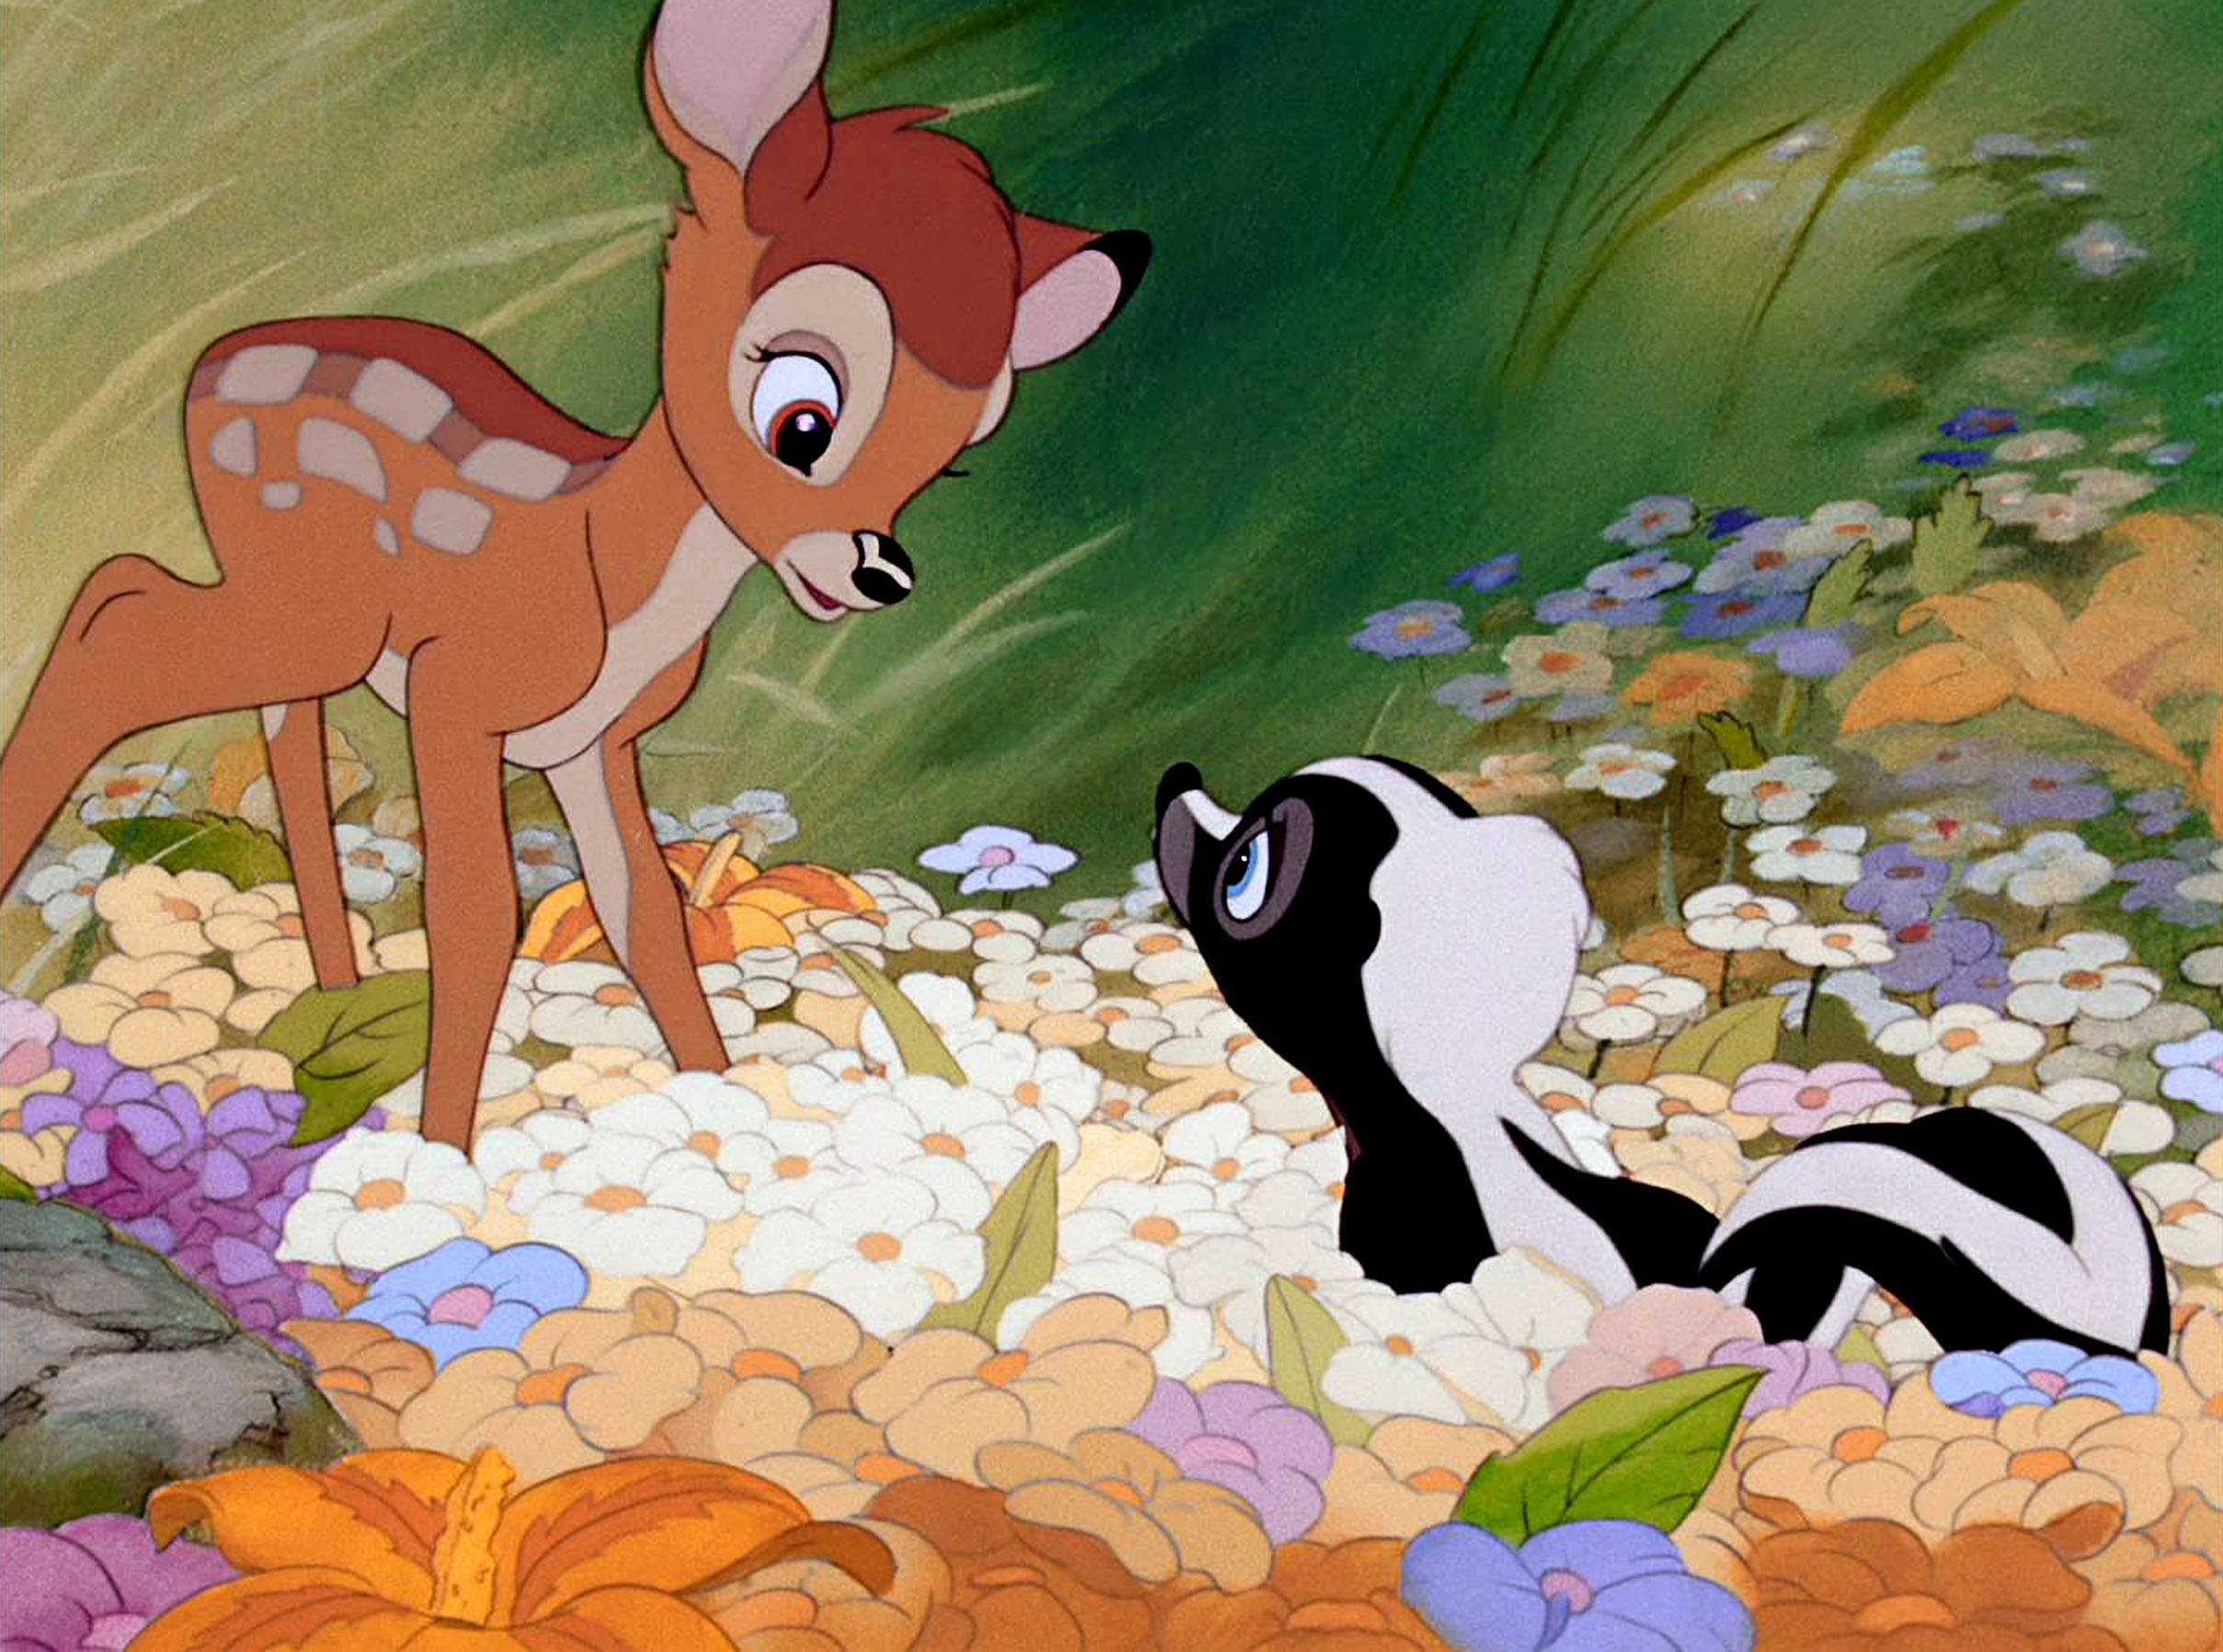 Bambi talking to a skunk